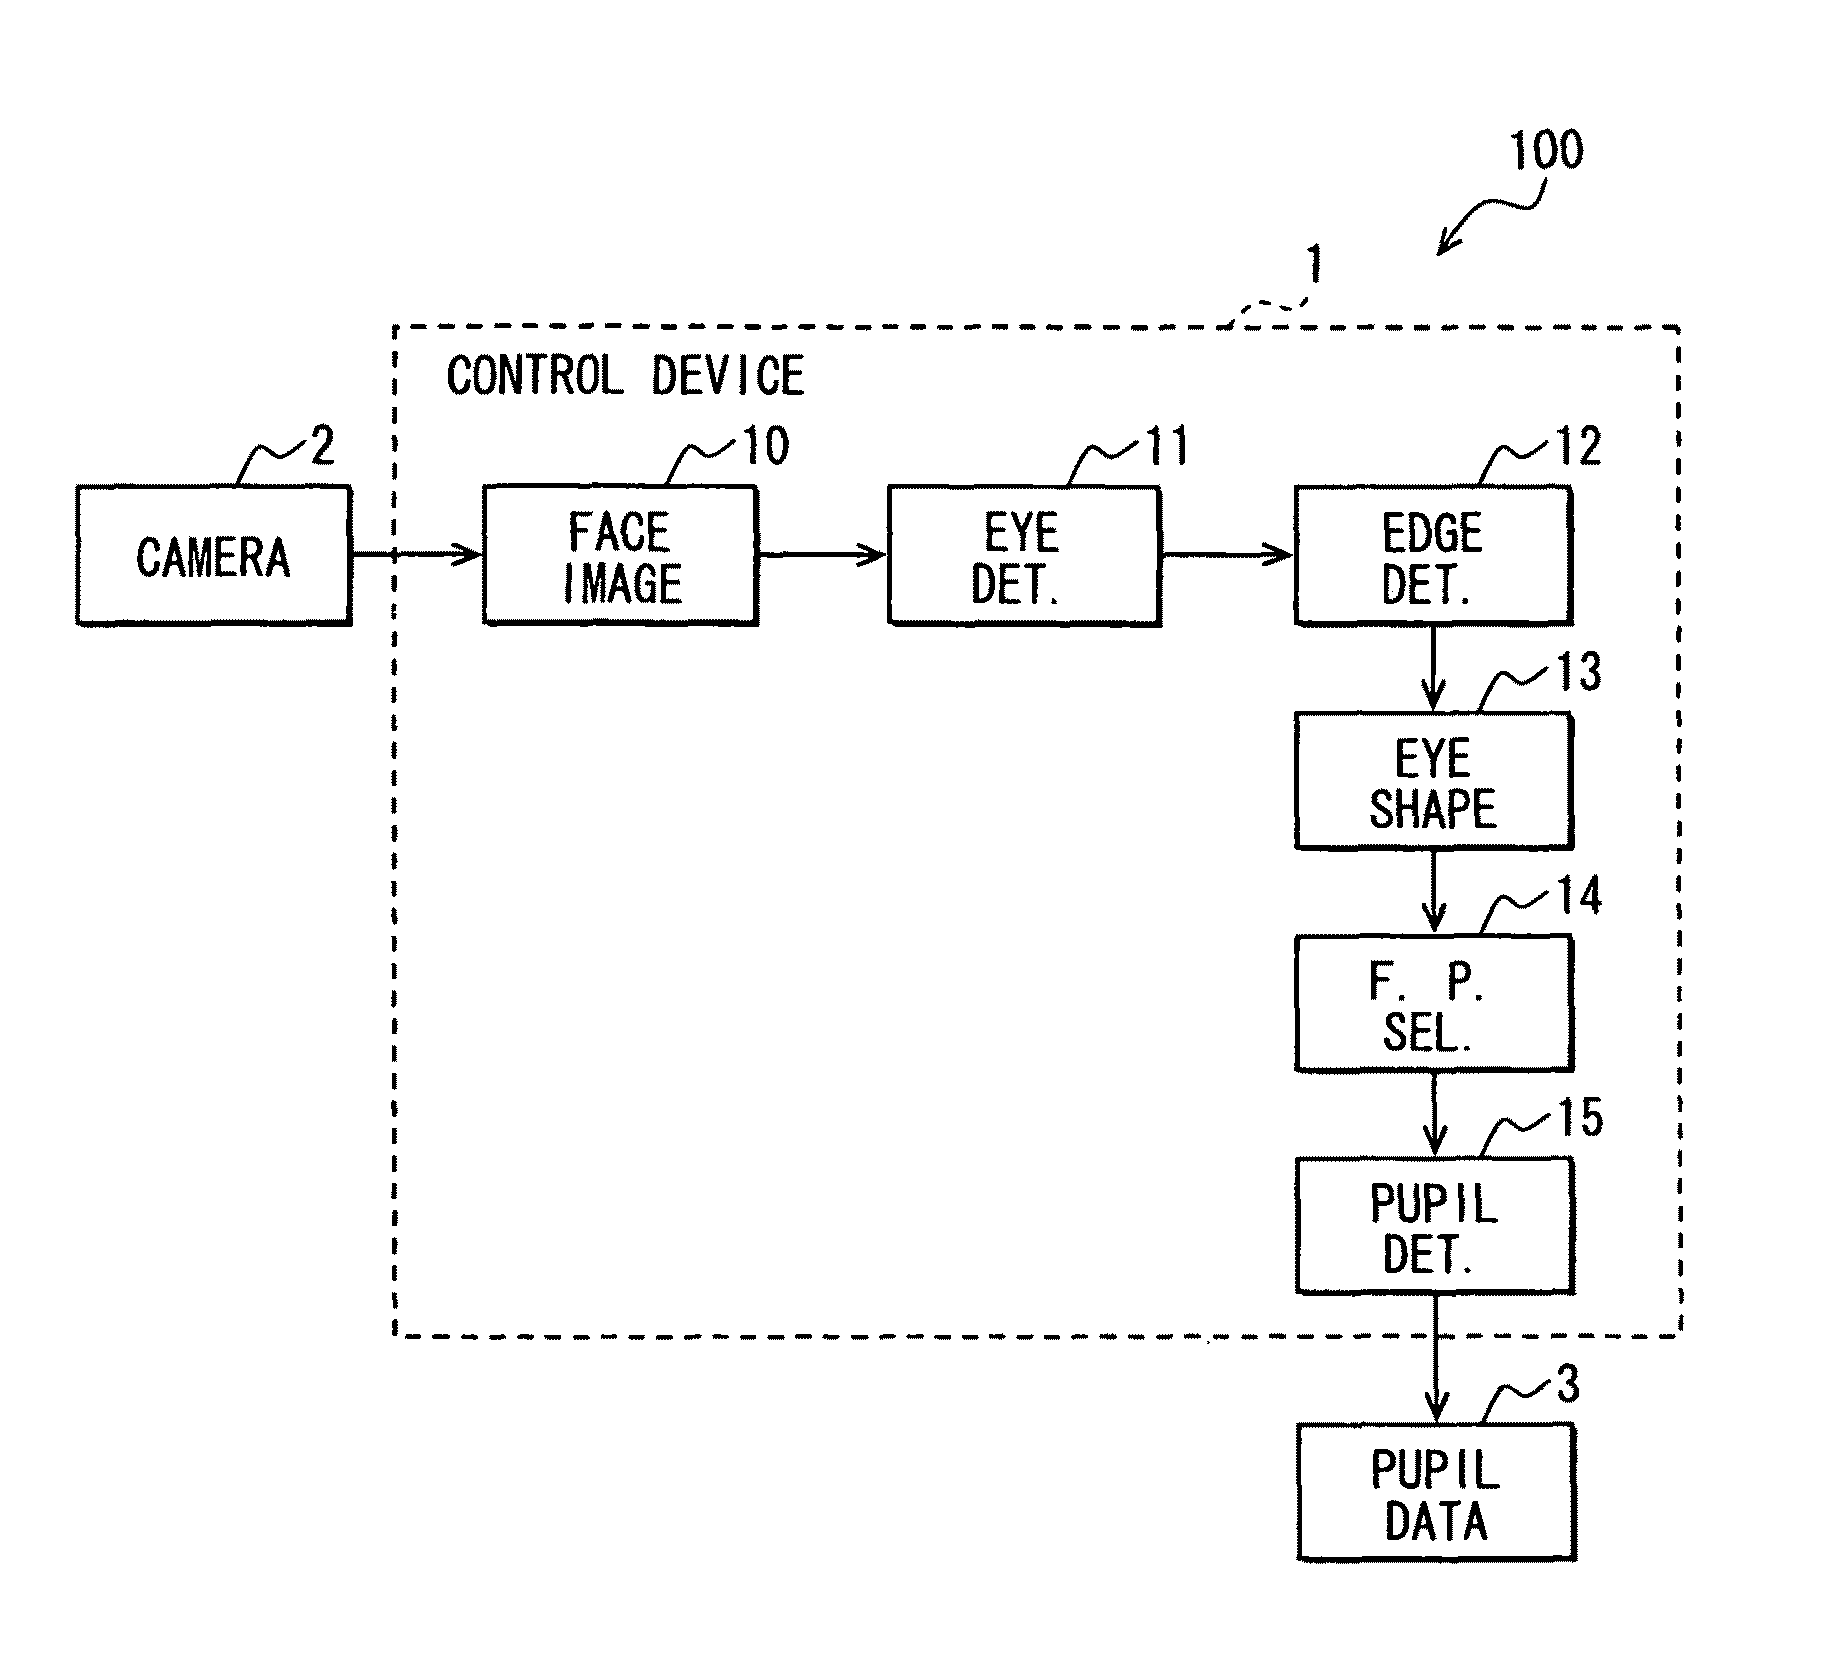 Apparatus for detecting a pupil, program for the same, and method for detecting a pupil